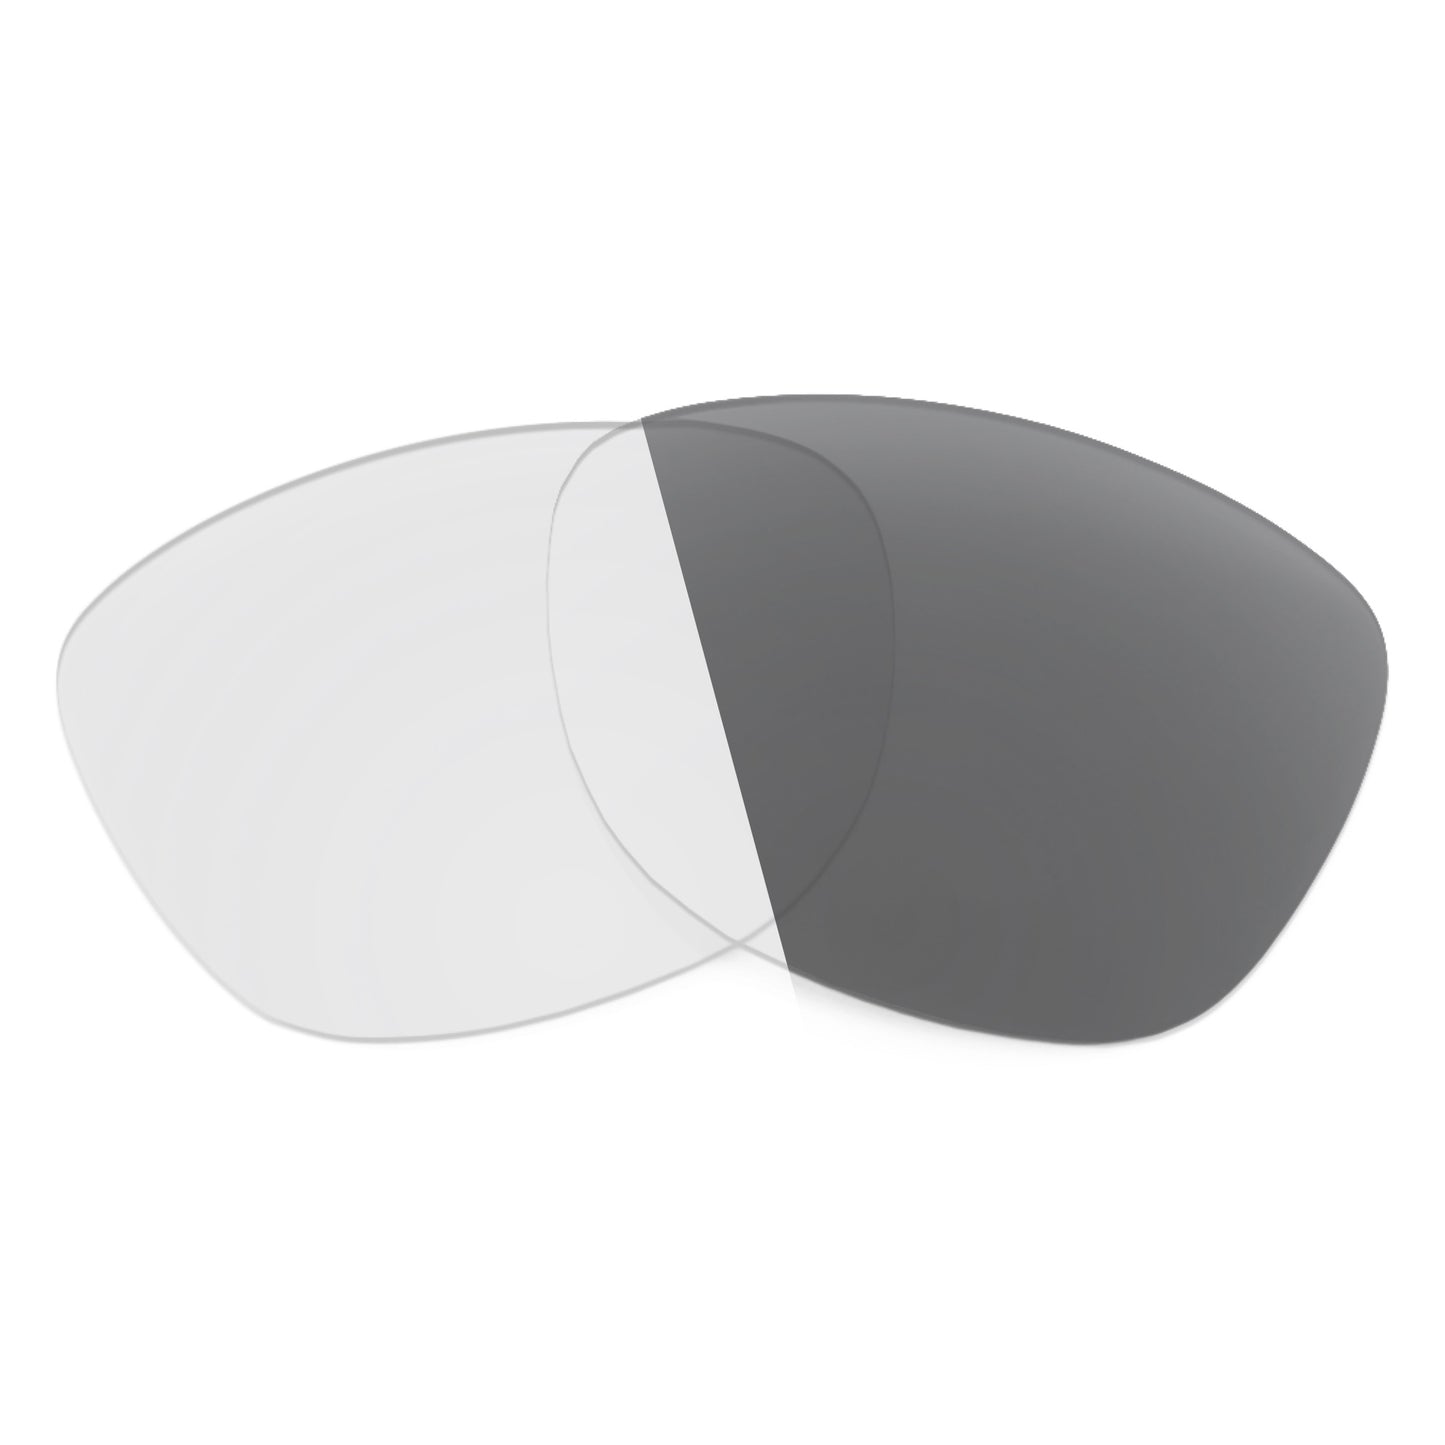 Revant replacement lenses for Ray-Ban Hexagonal RB3548N 54mm Non-Polarized Adapt Gray Photochromic